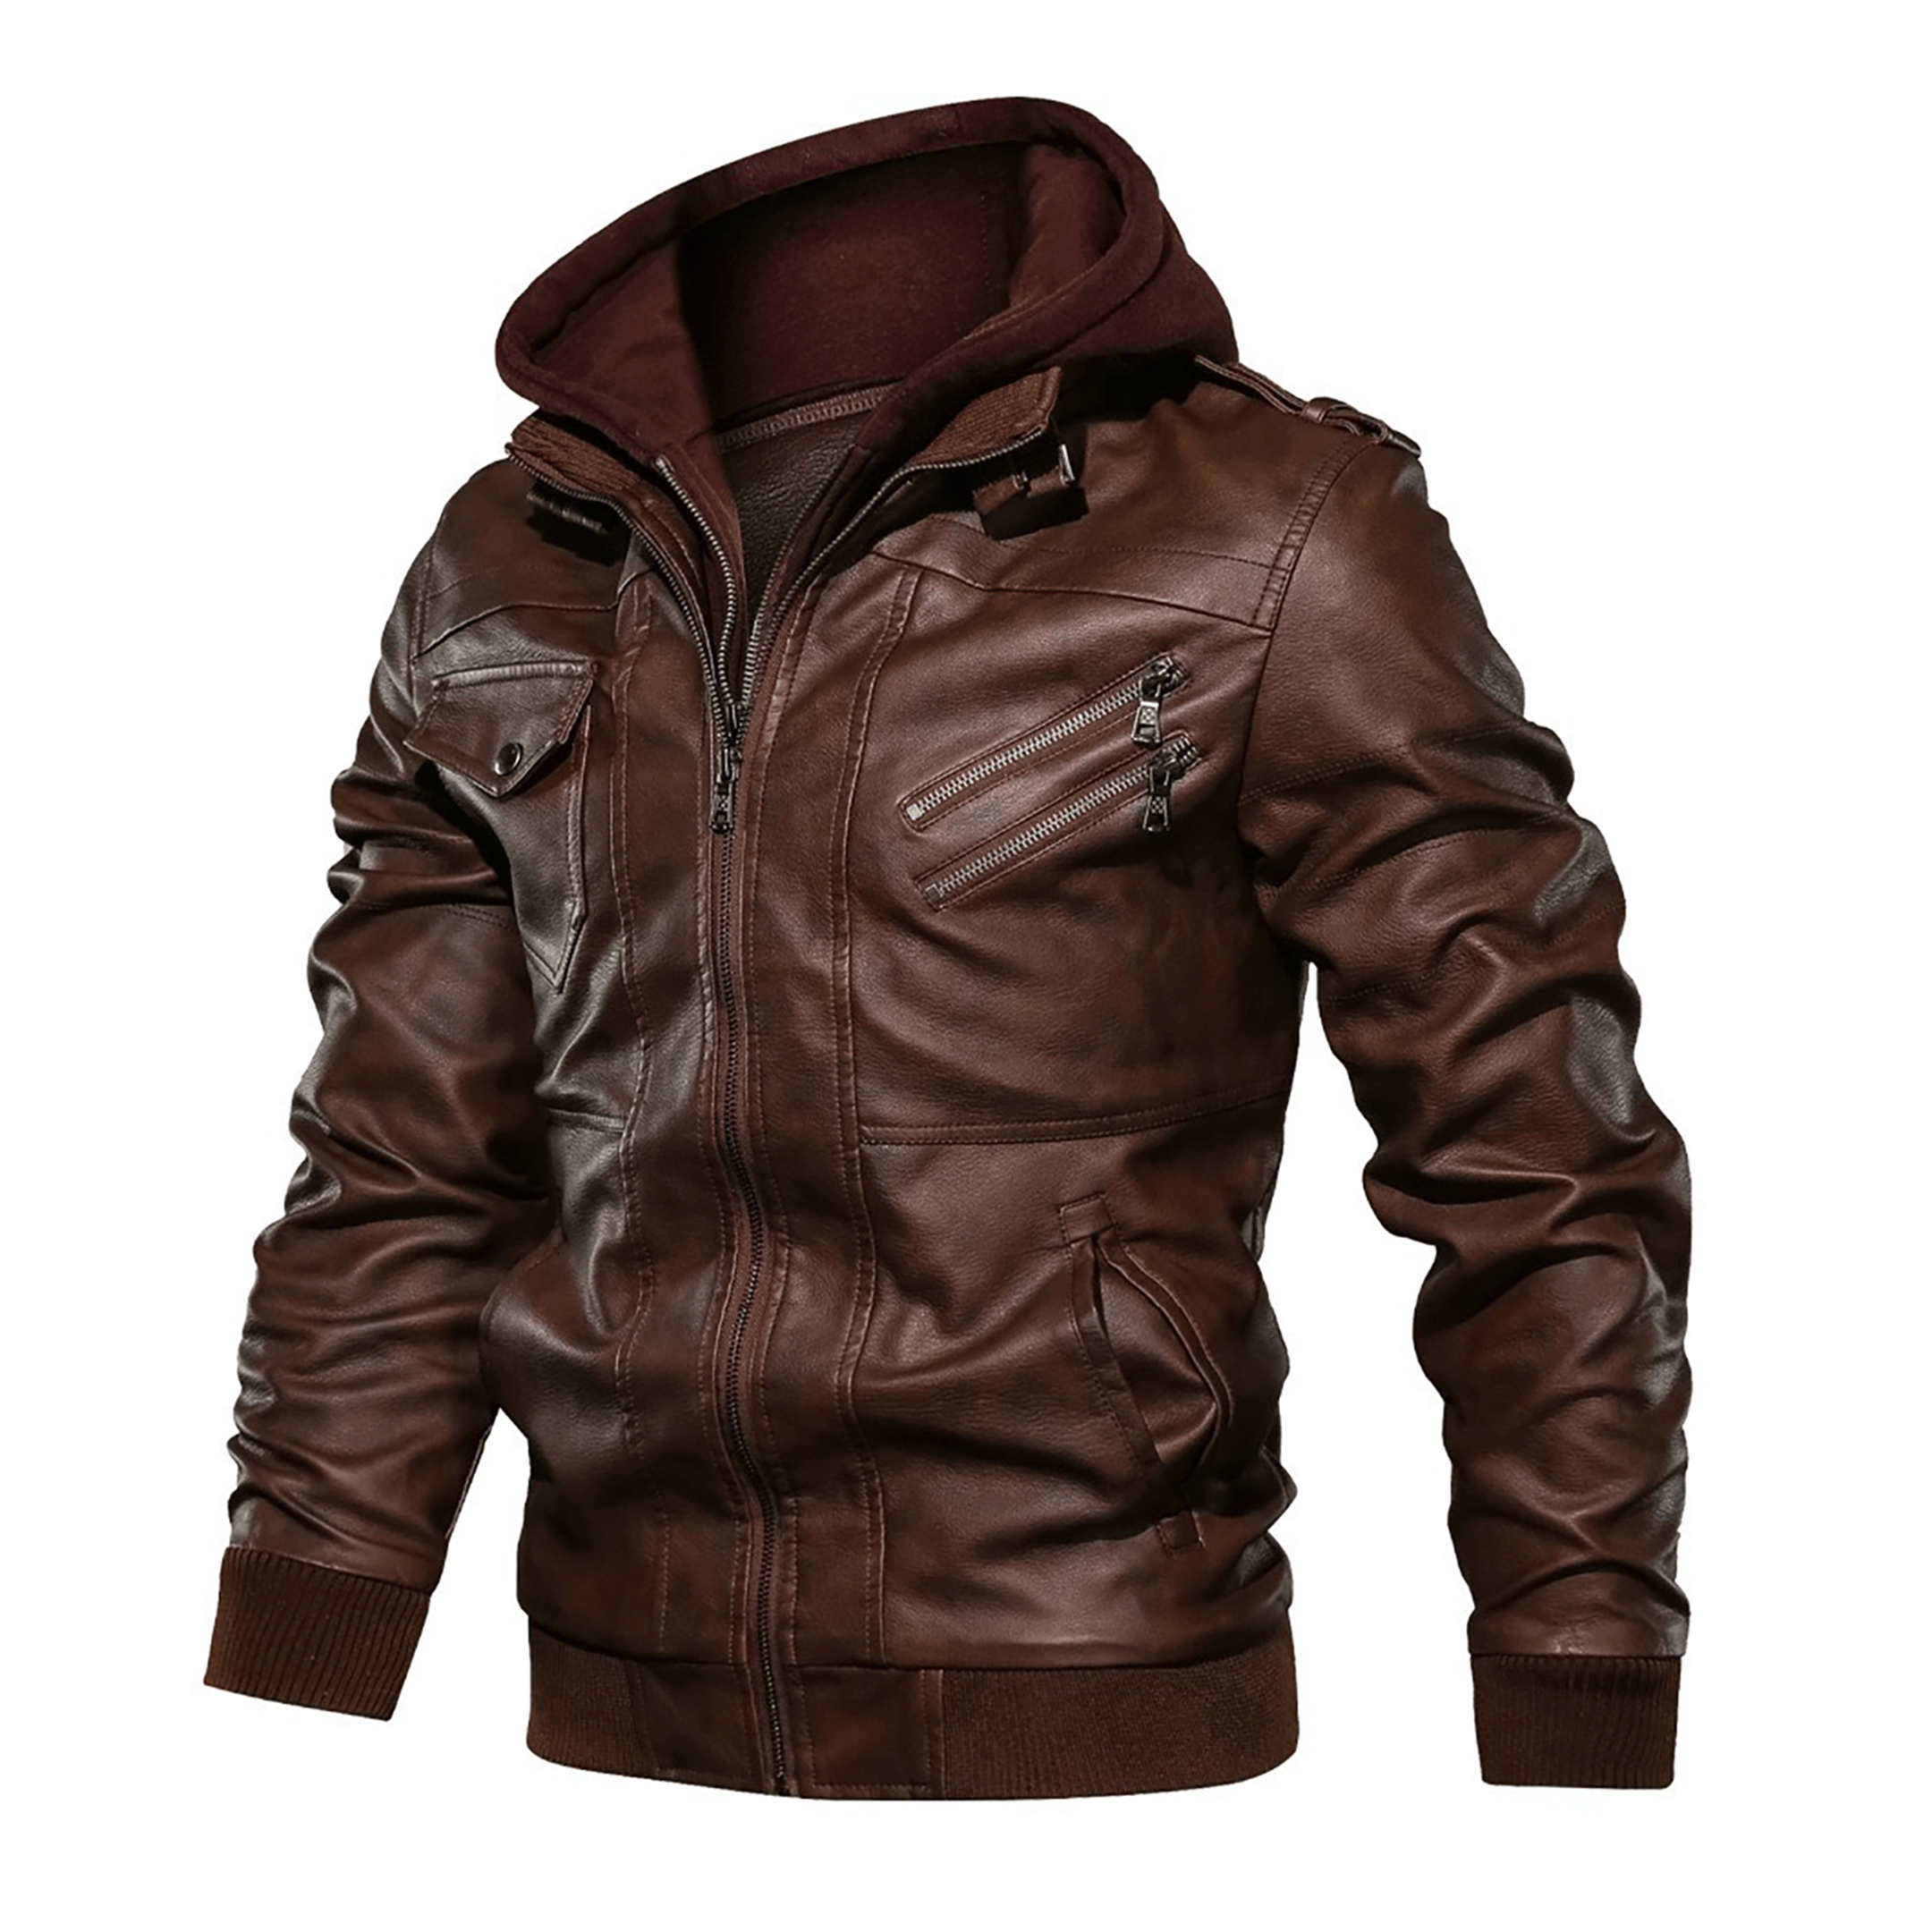 Top leather jackets and latest products 229